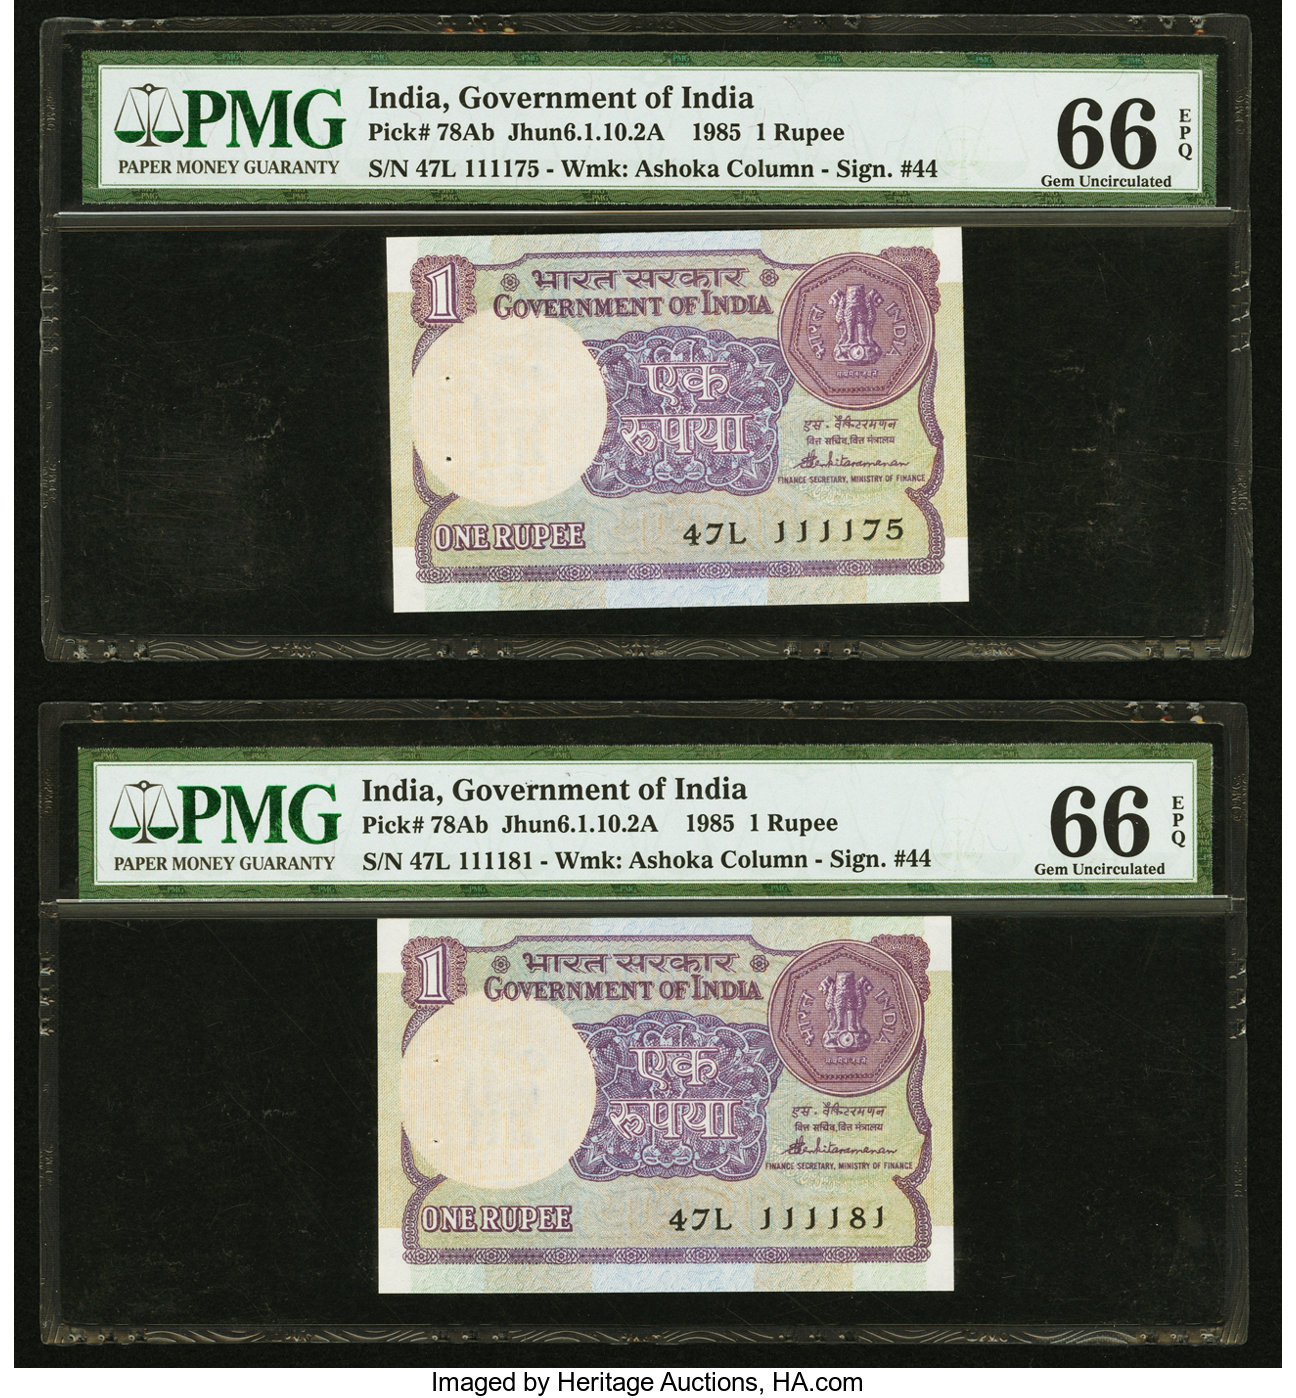 Reserve Bank of India 10 rupees B261a,P81a No date Sig 8 